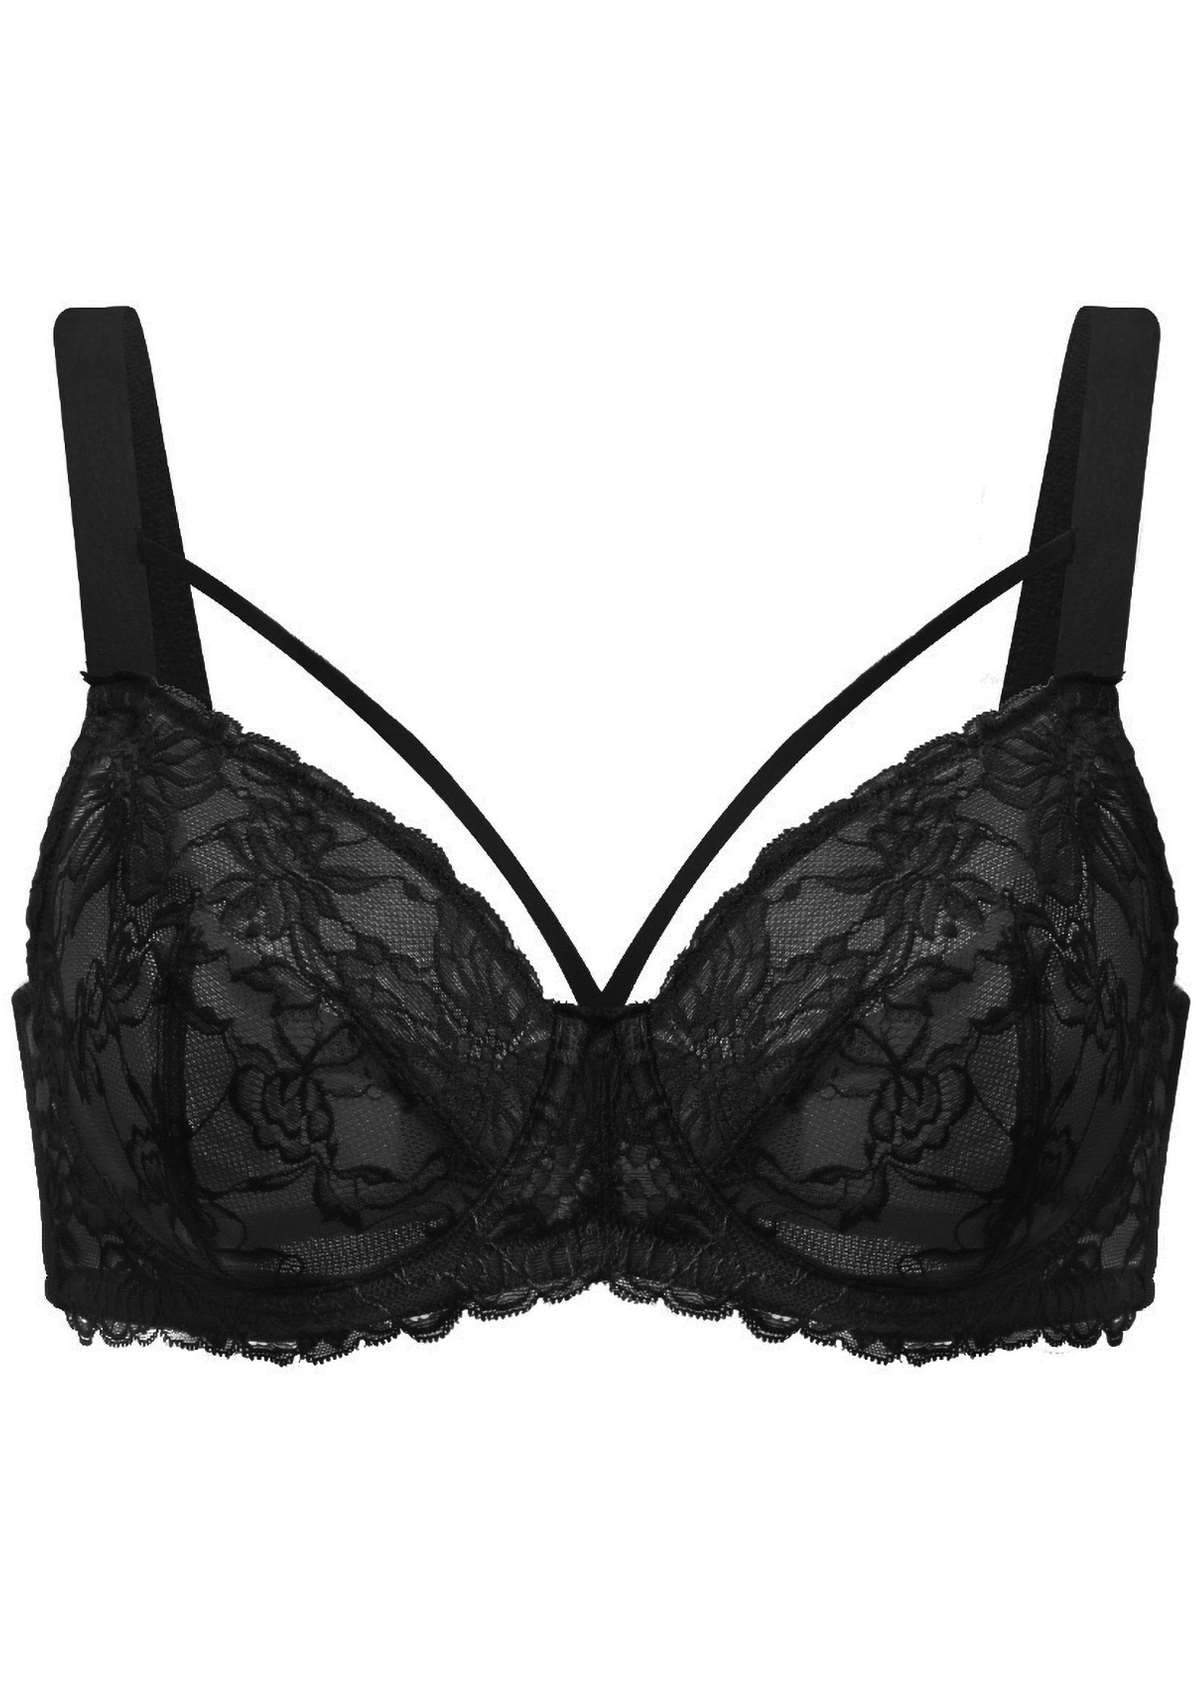 HSIA Pretty In Petals Bra - Plus Size Lingerie For Comfrot And Support - Black / 40 / I